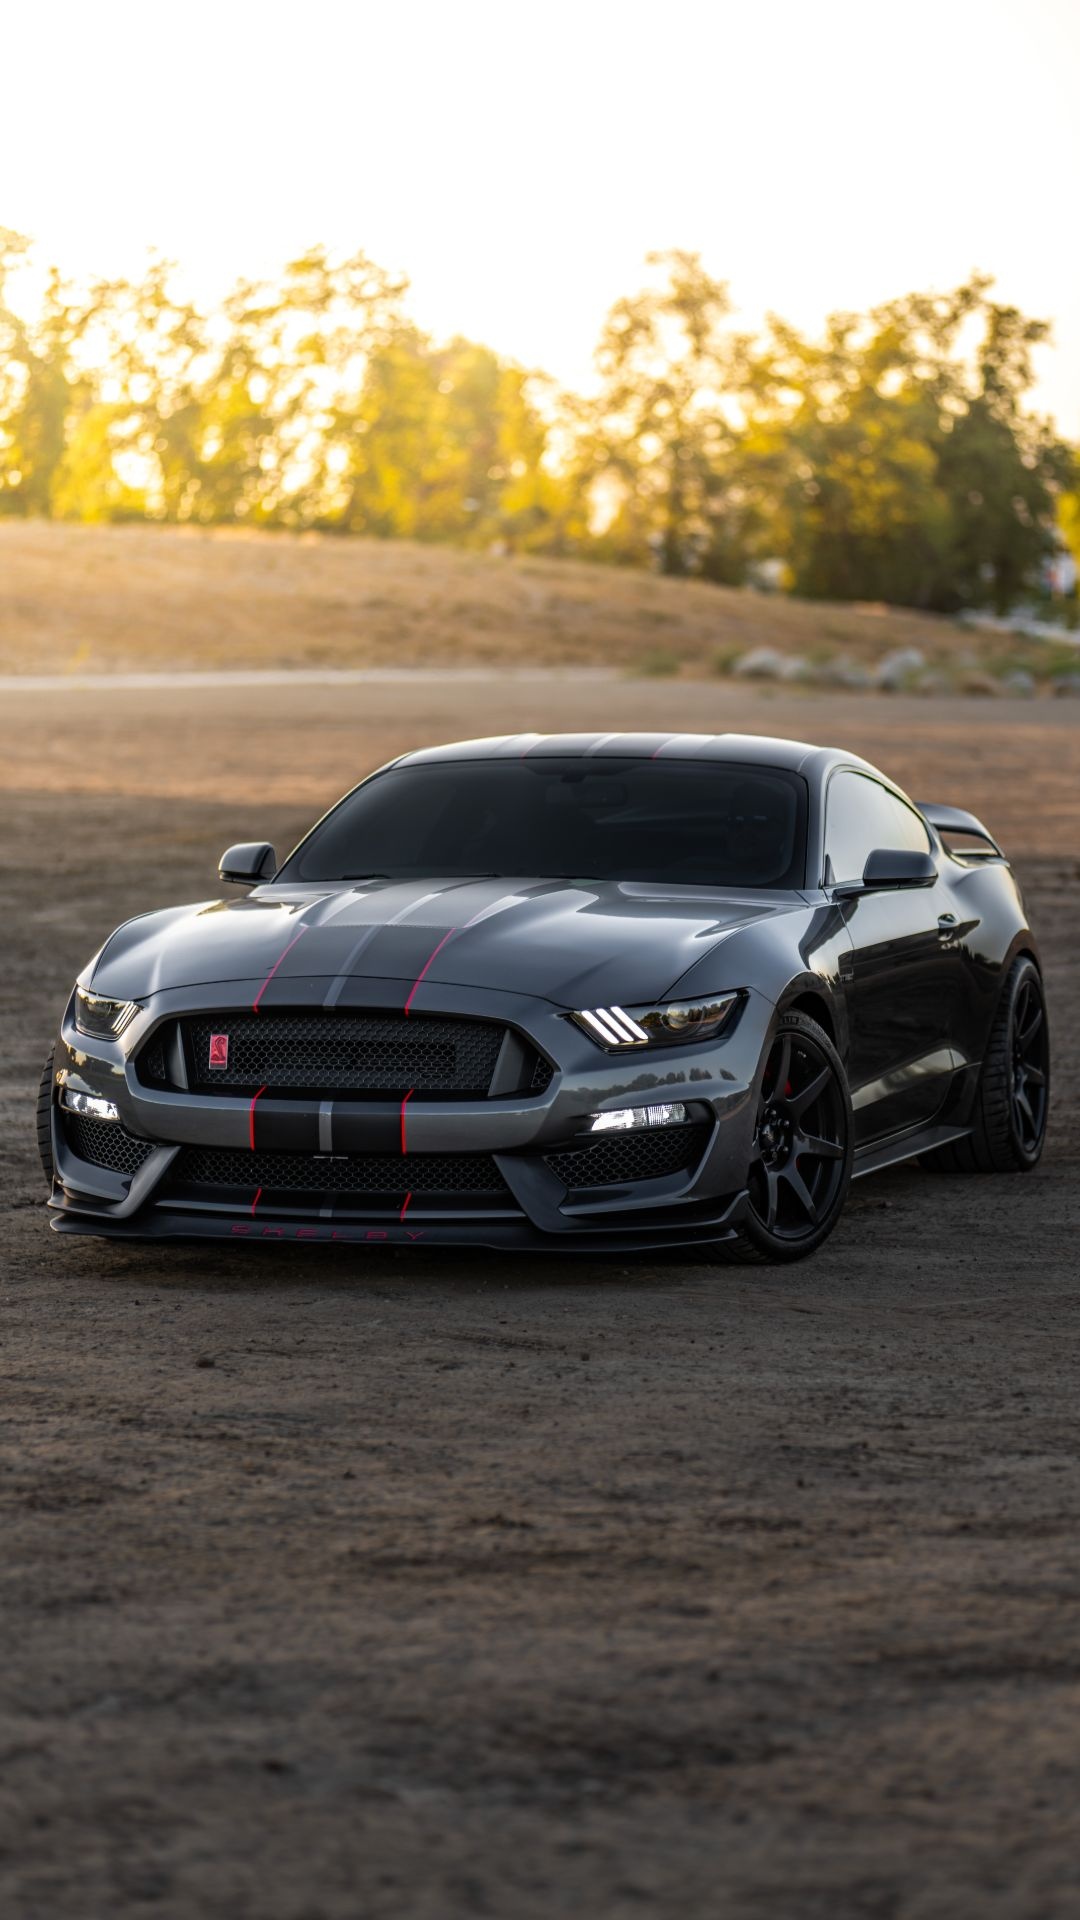 Ford Mustang: An iconic American brand, Pony car. 1080x1920 Full HD Wallpaper.